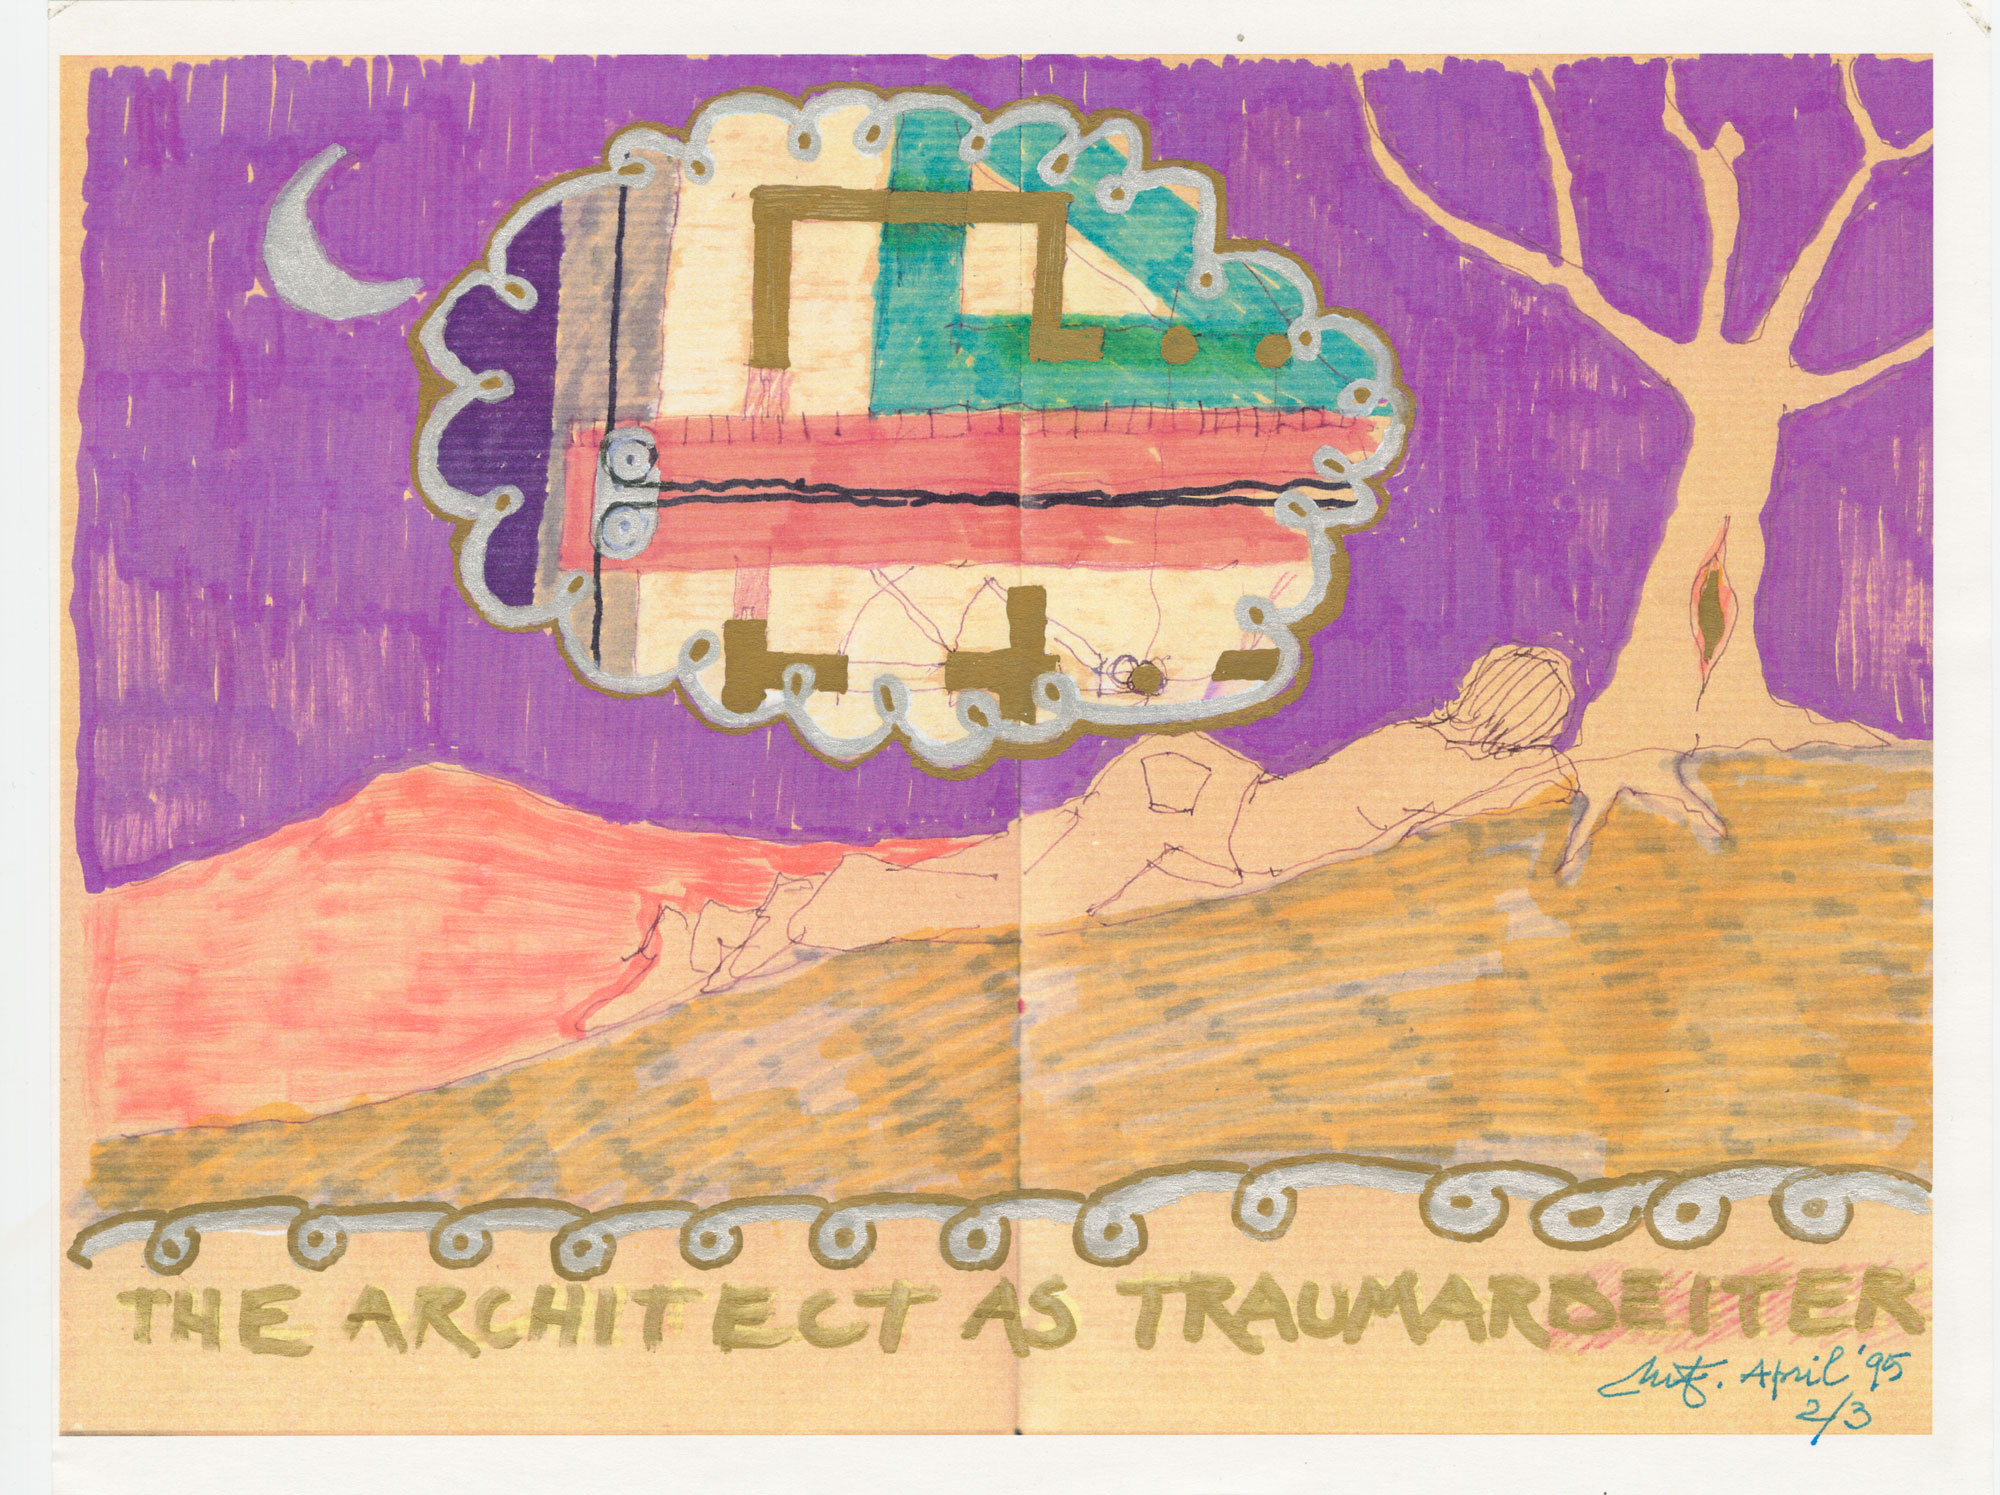 Color sketch by Marco Frascari called 'Architect as Traumarbeiter'